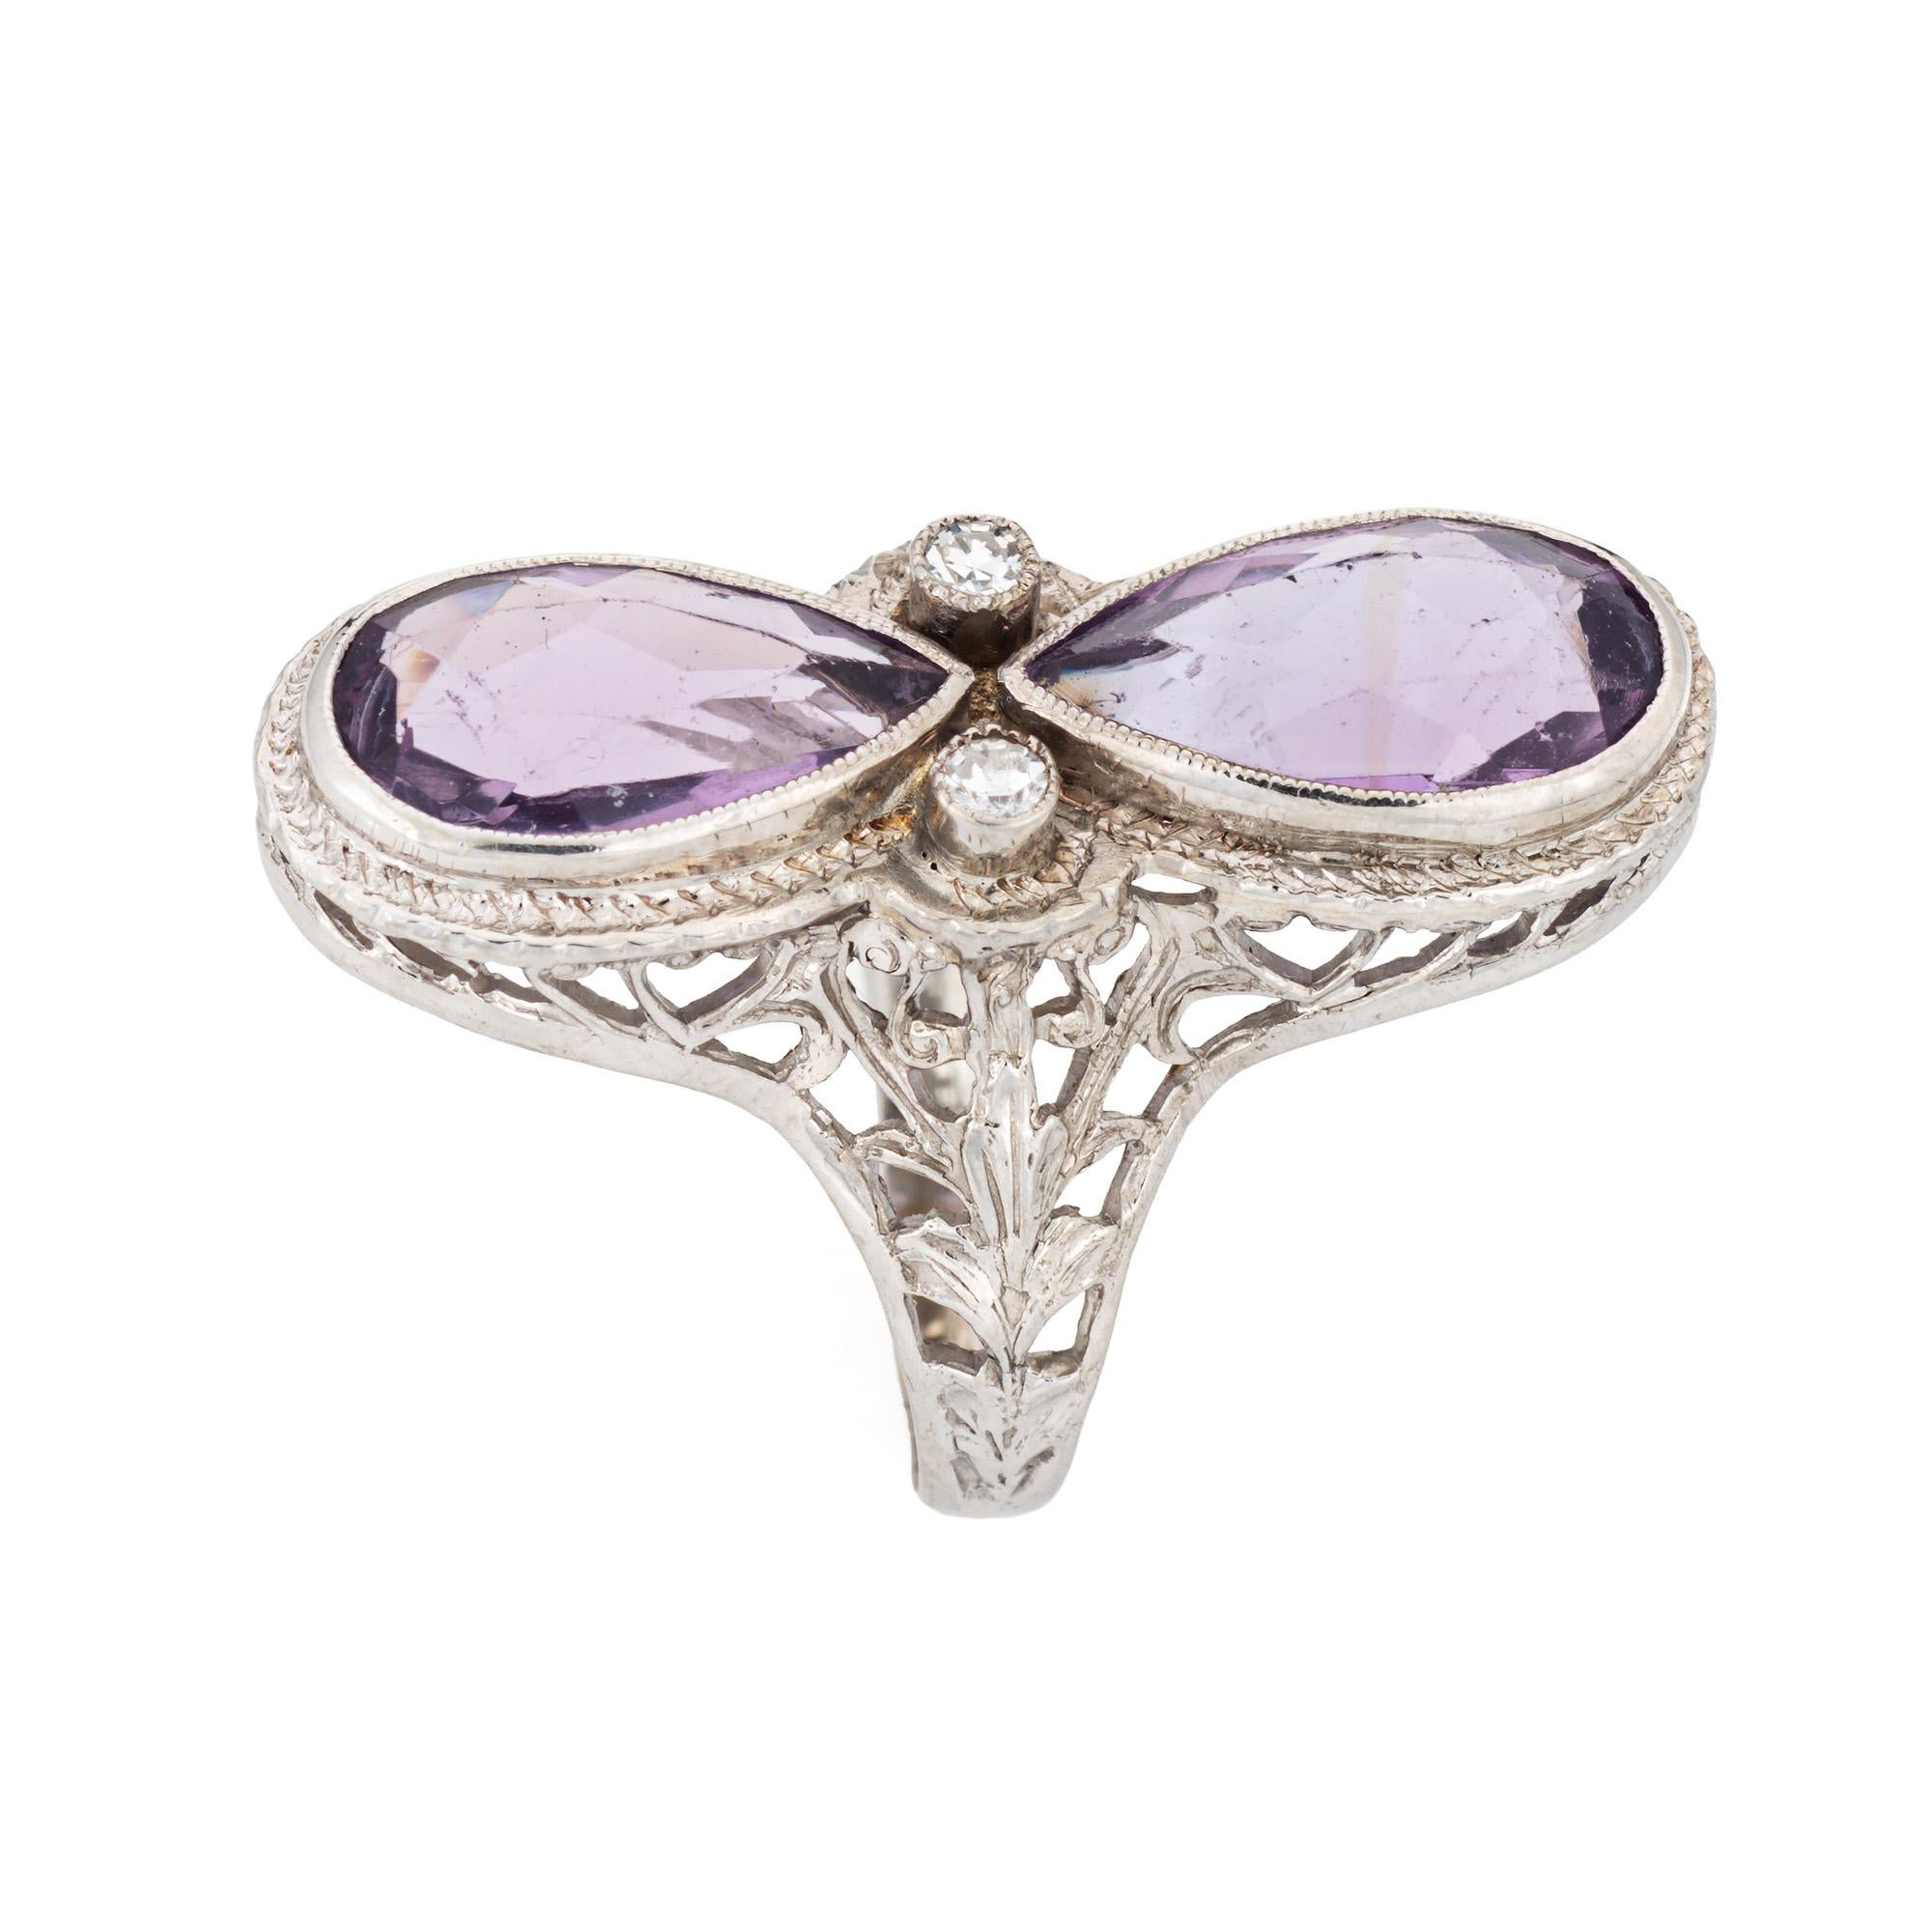 Finely detailed vintage Art Deco elongated amethyst & diamond ring (circa 1920s to 1930s) crafted in 14 karat white gold. 

Pear cut amethysts measure 10mm x 6mm (estimated at 1.25 carats each - 2.50 carats total estimated weight). Two diamonds